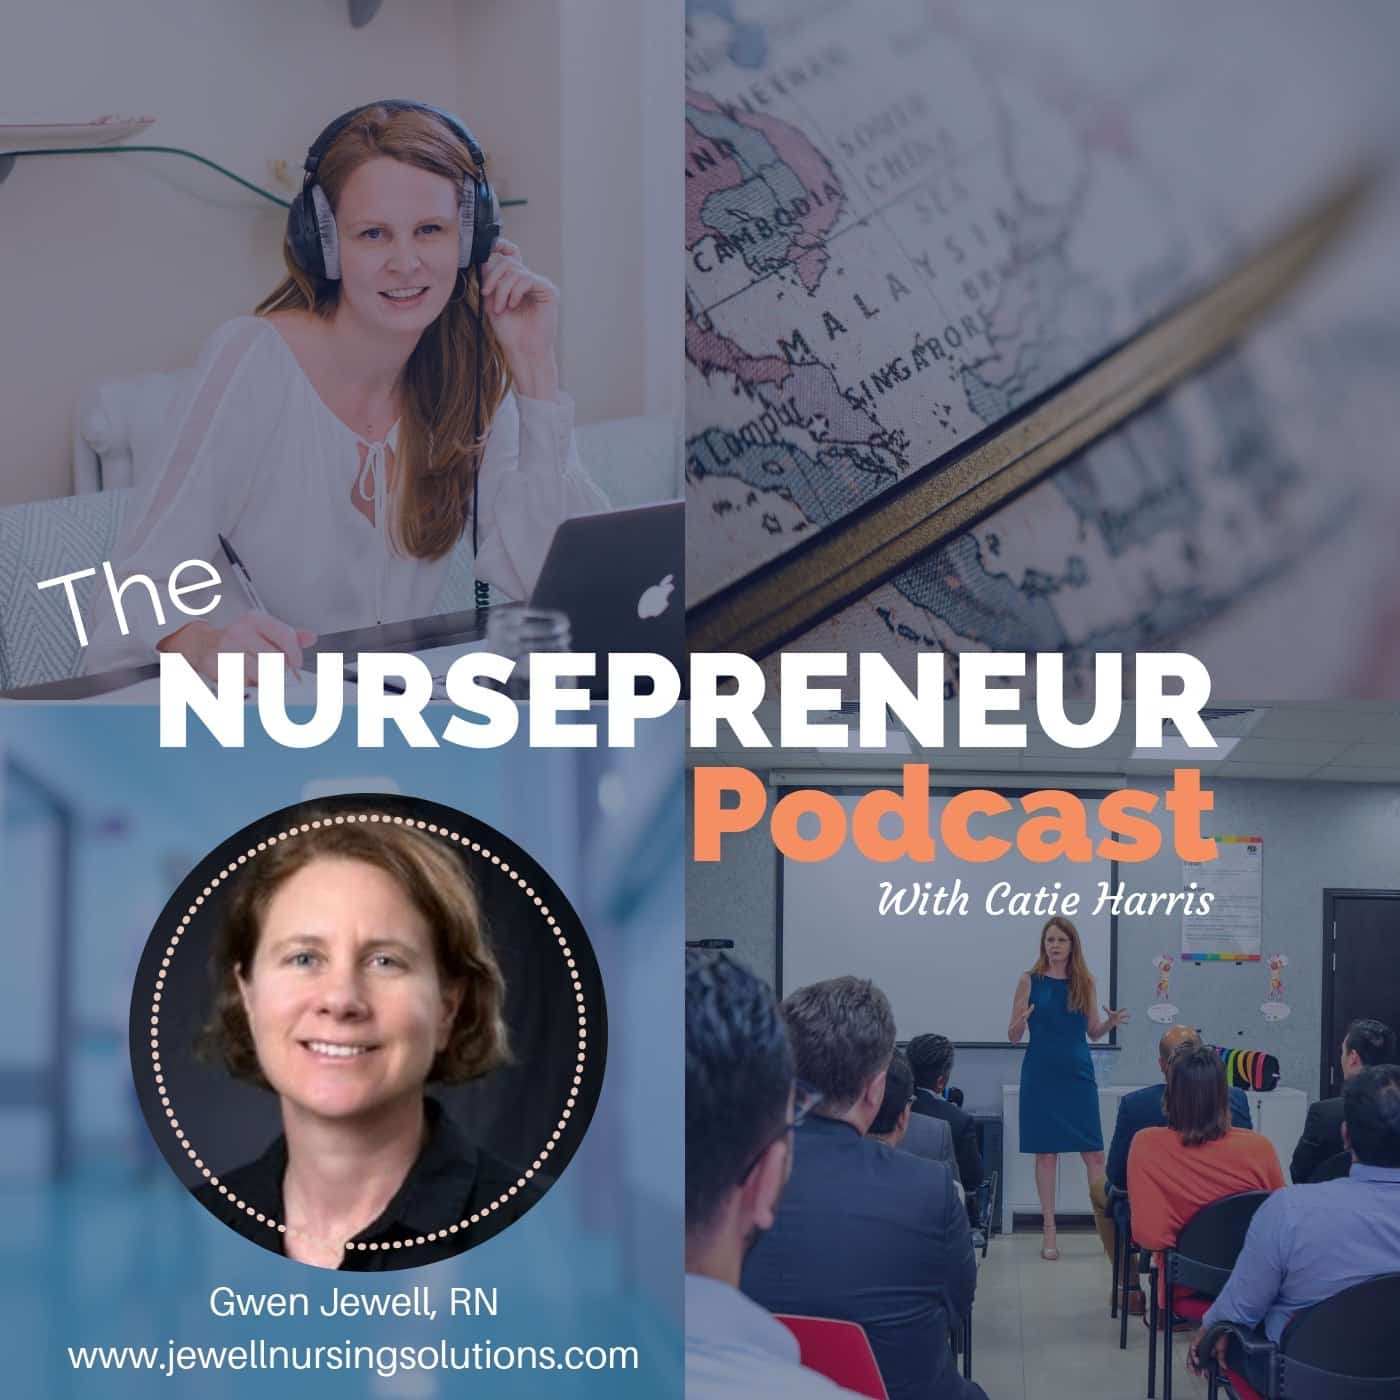 Floating In Space - Podcast with Nursepreneur founder Catie Harris